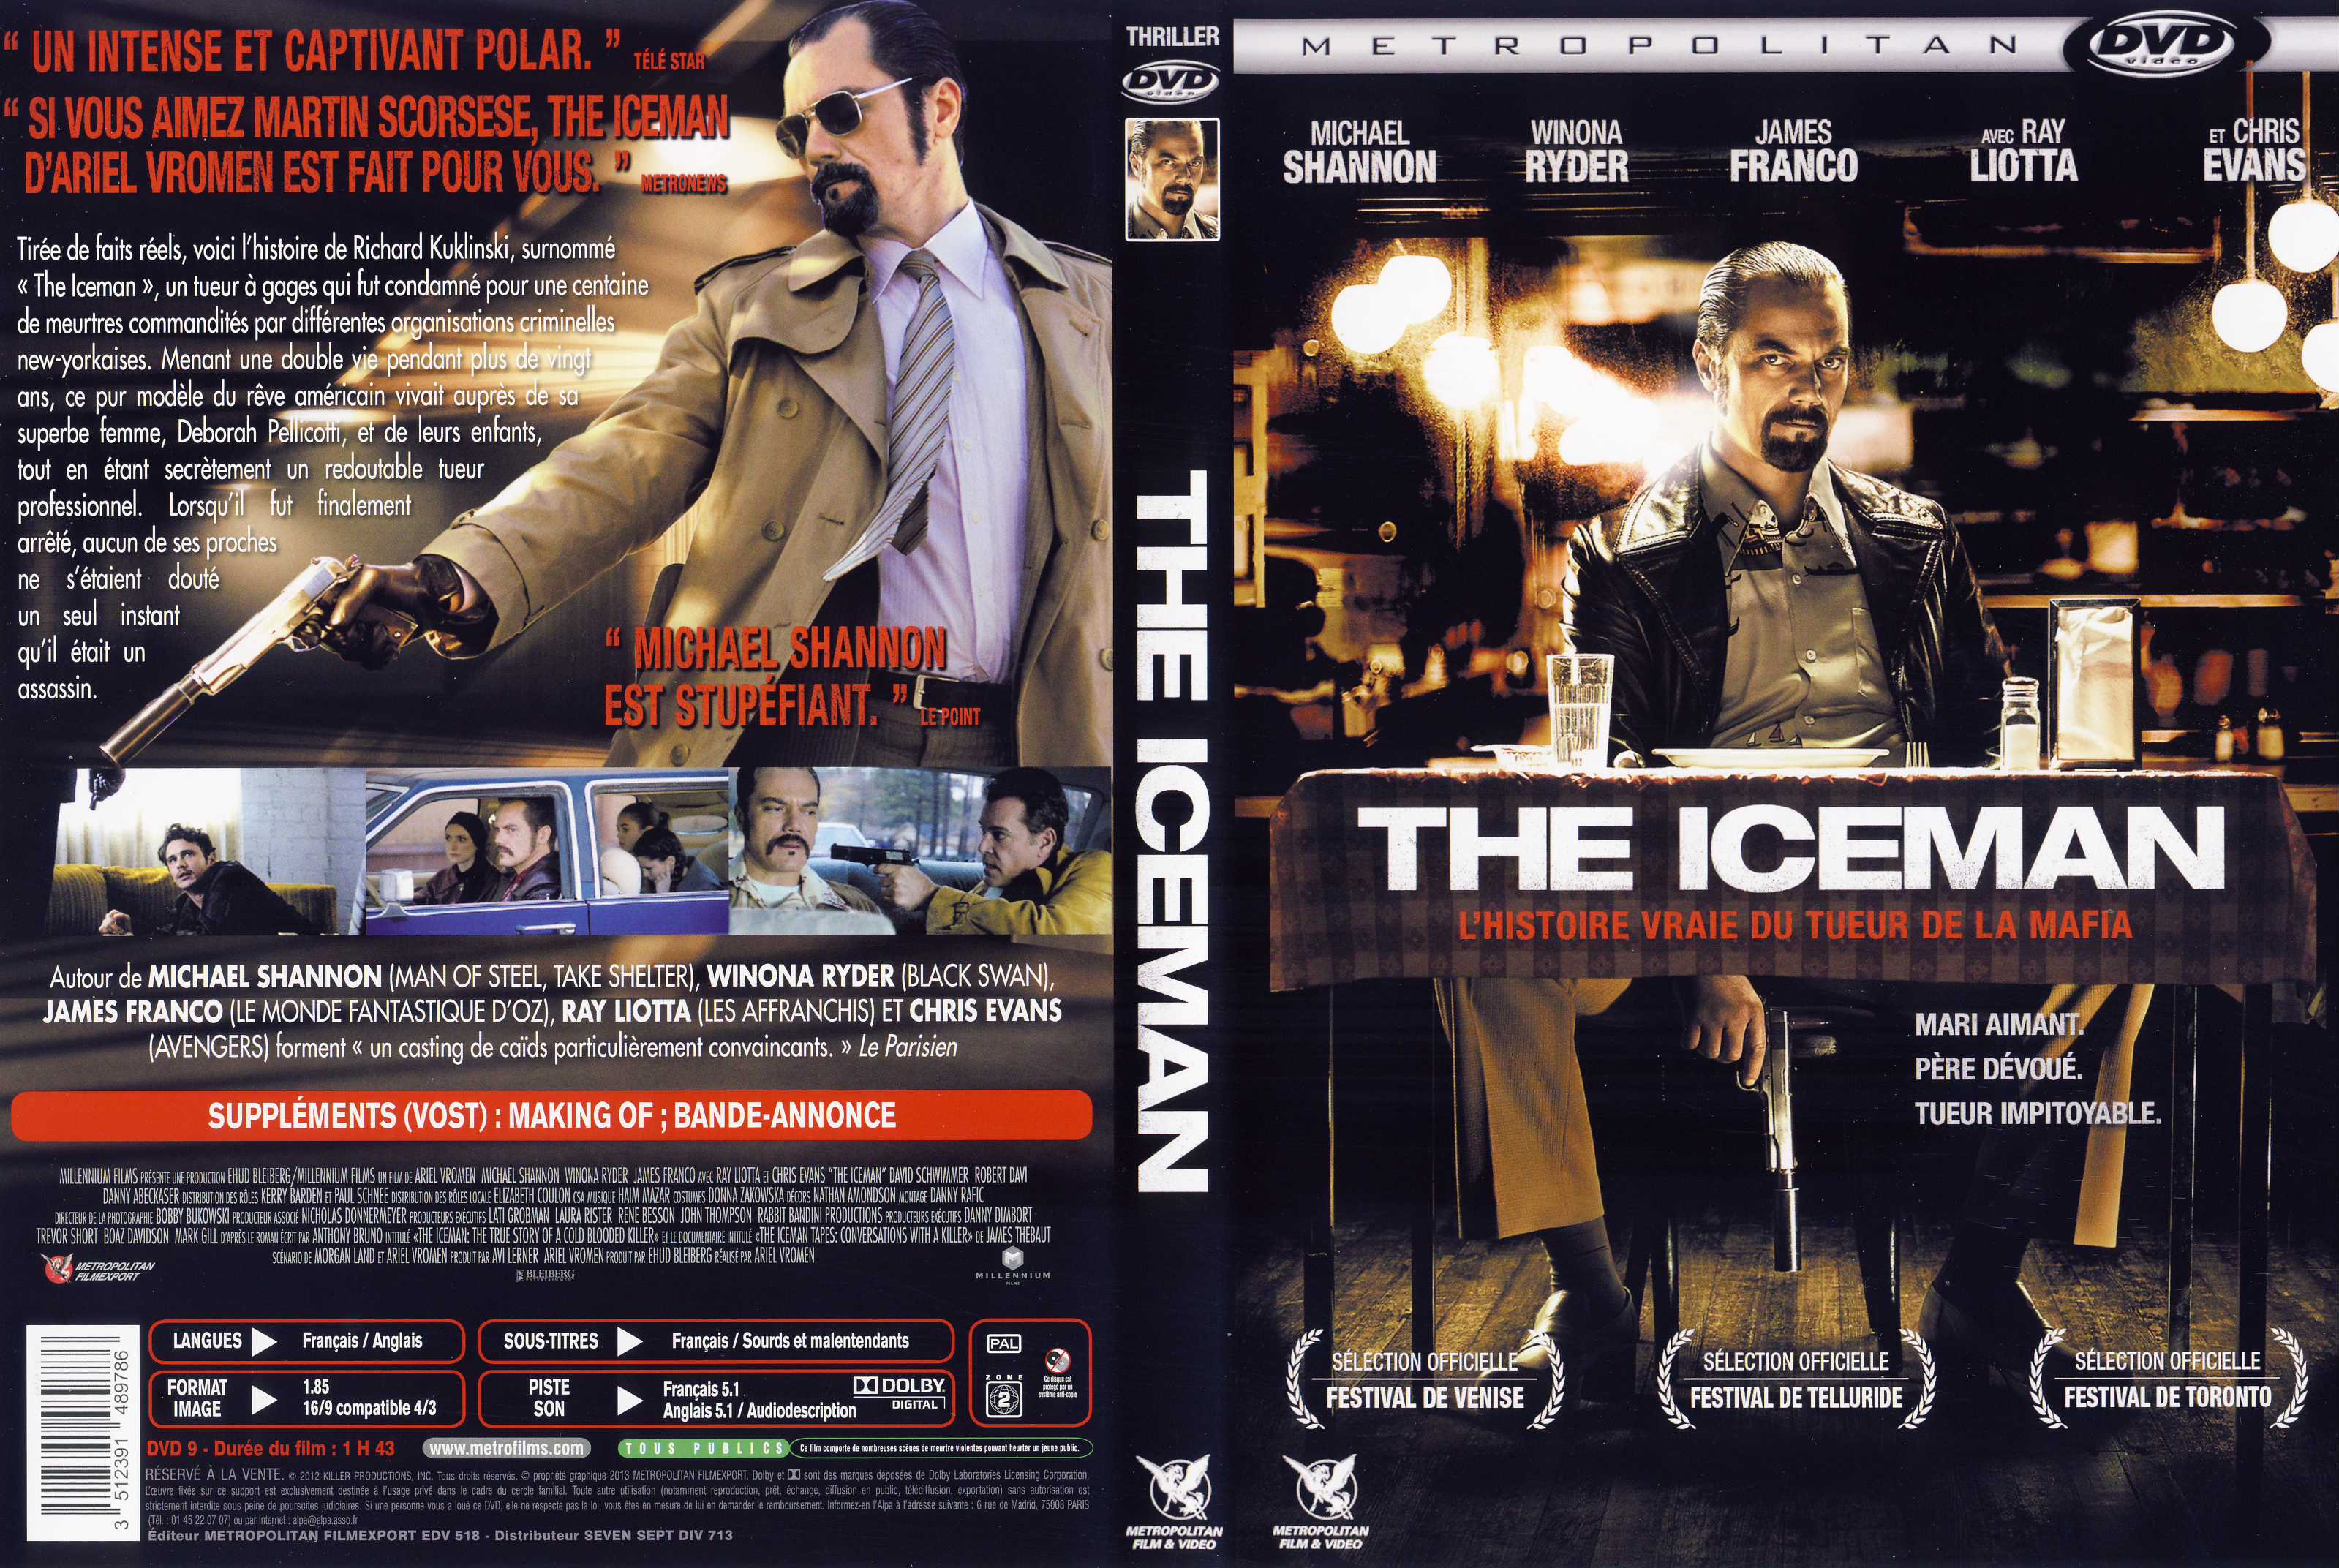 Jaquette DVD The Iceman